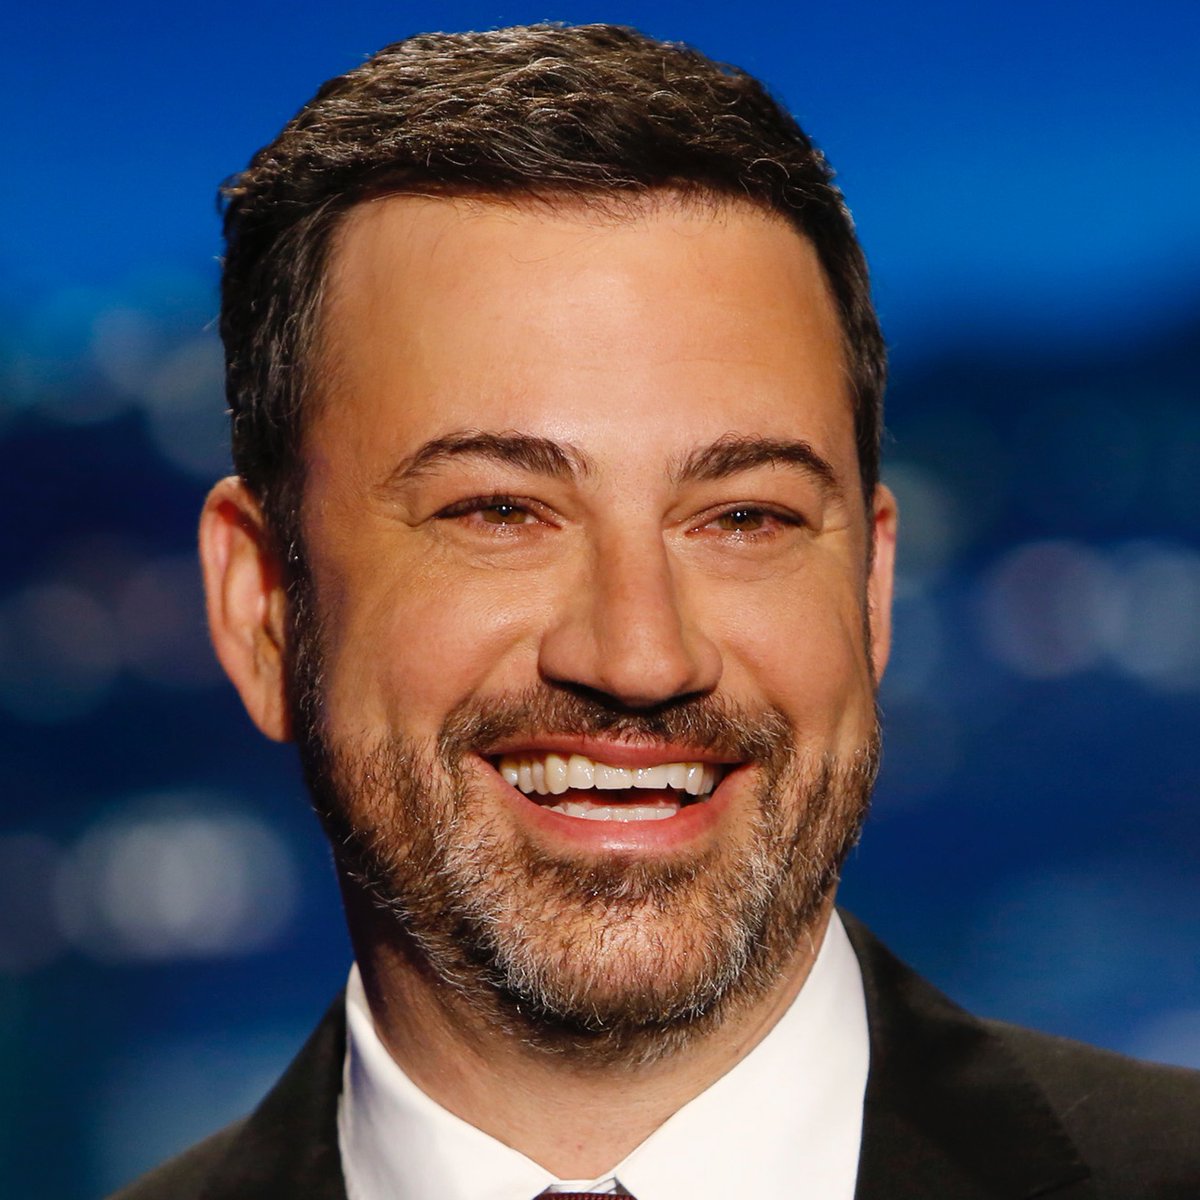 🚨BREAKING: Steven Spielberg and Jimmy Kimmel say they will leave the United States if the Epstein Client List is released. What's your reaction?